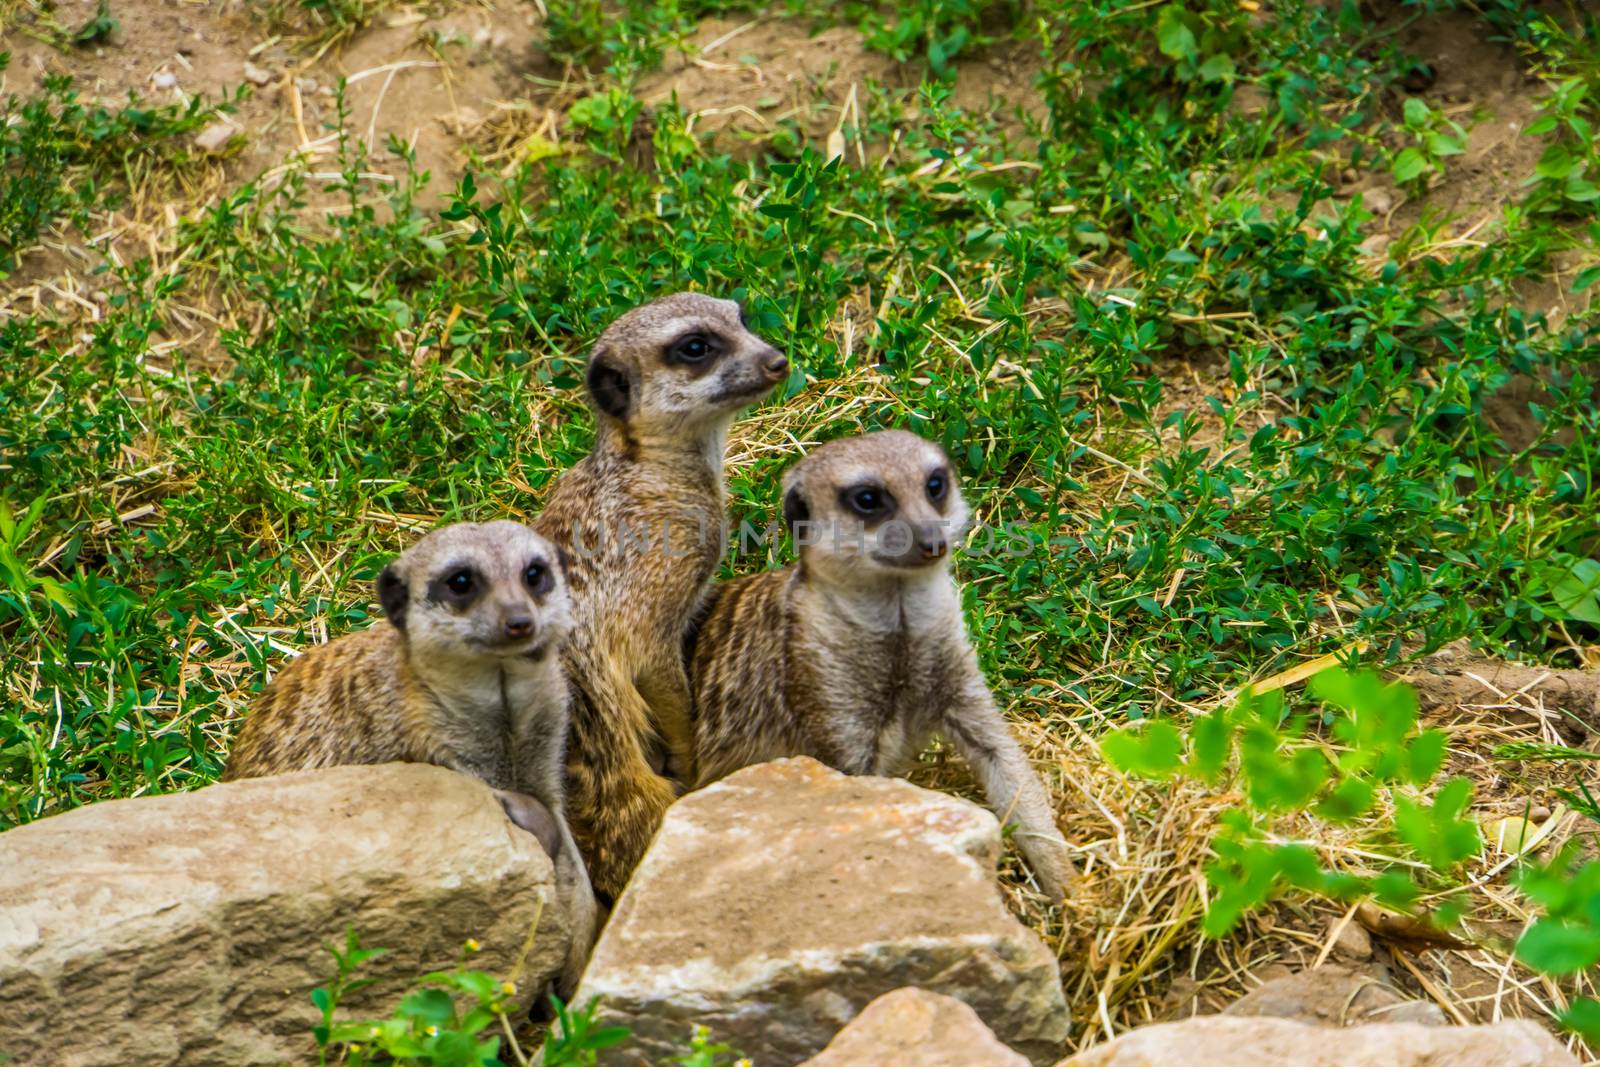 cute group of meerkats sitting together, tropical animal specie from Africa by charlottebleijenberg